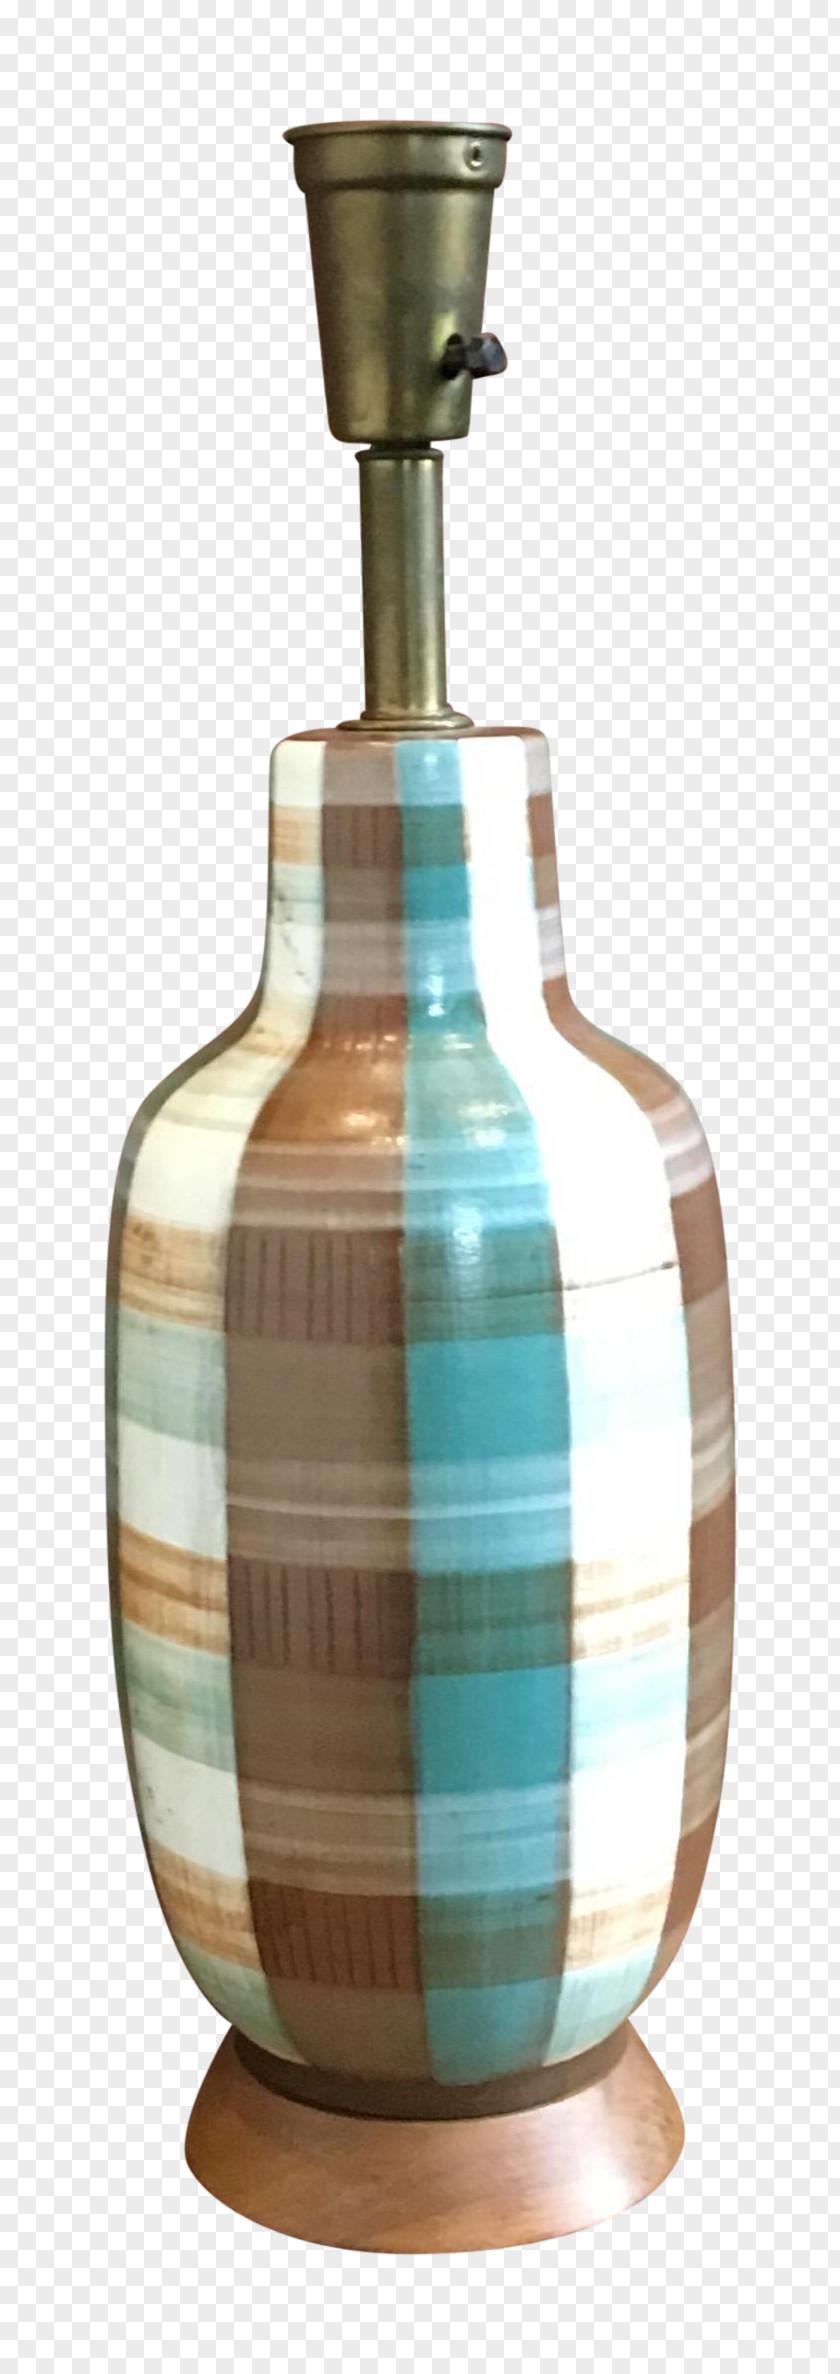 Hand-painted Lamp Ceramic Vase Pottery Glass Bottle PNG